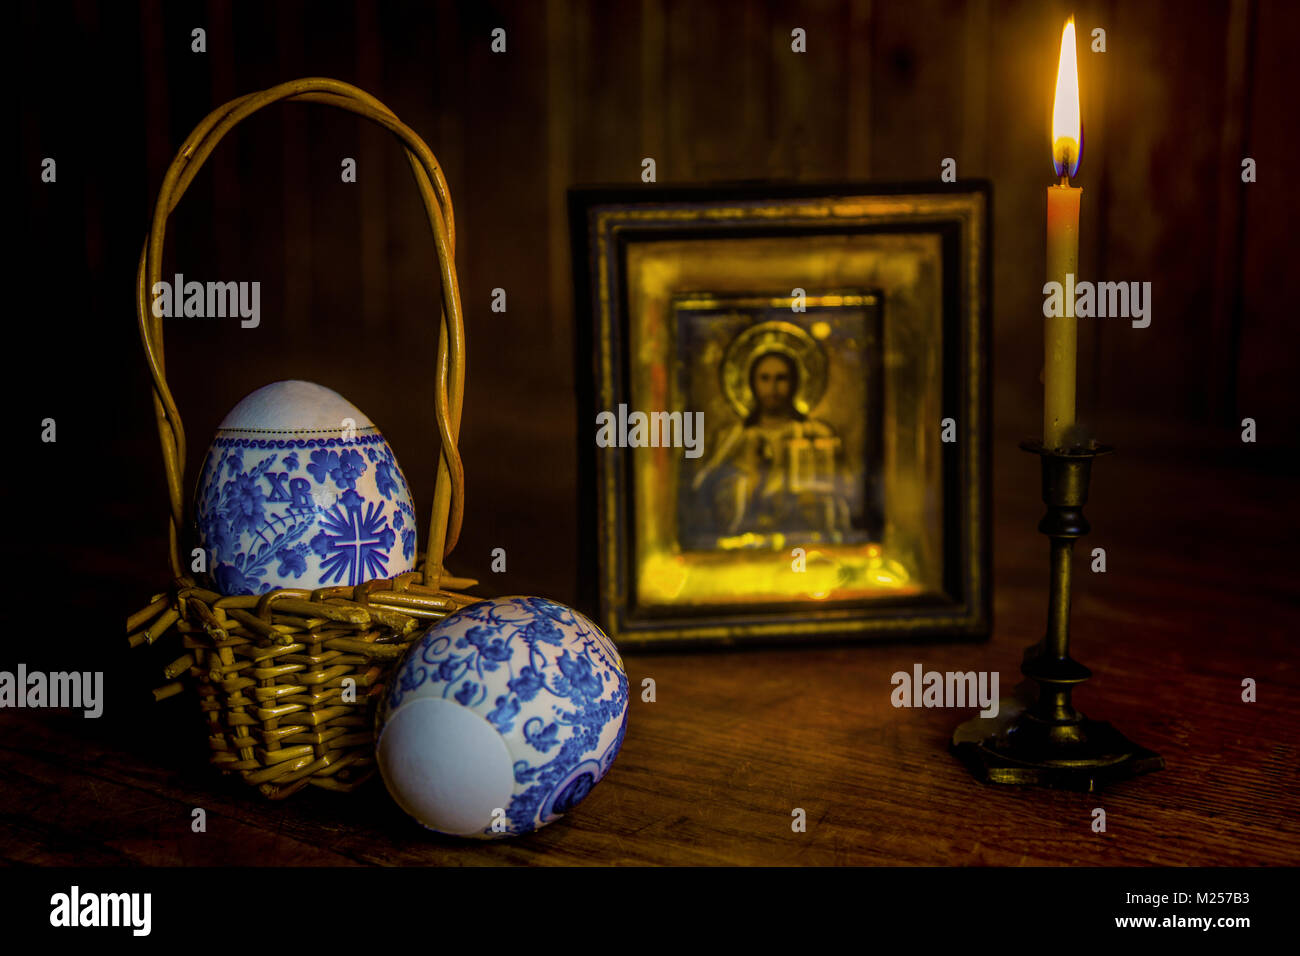 Easter eggs and a burning candle in a candlestick in front of an icon of Jesus Christ on a wooden table against a wall of wood. Stock Photo